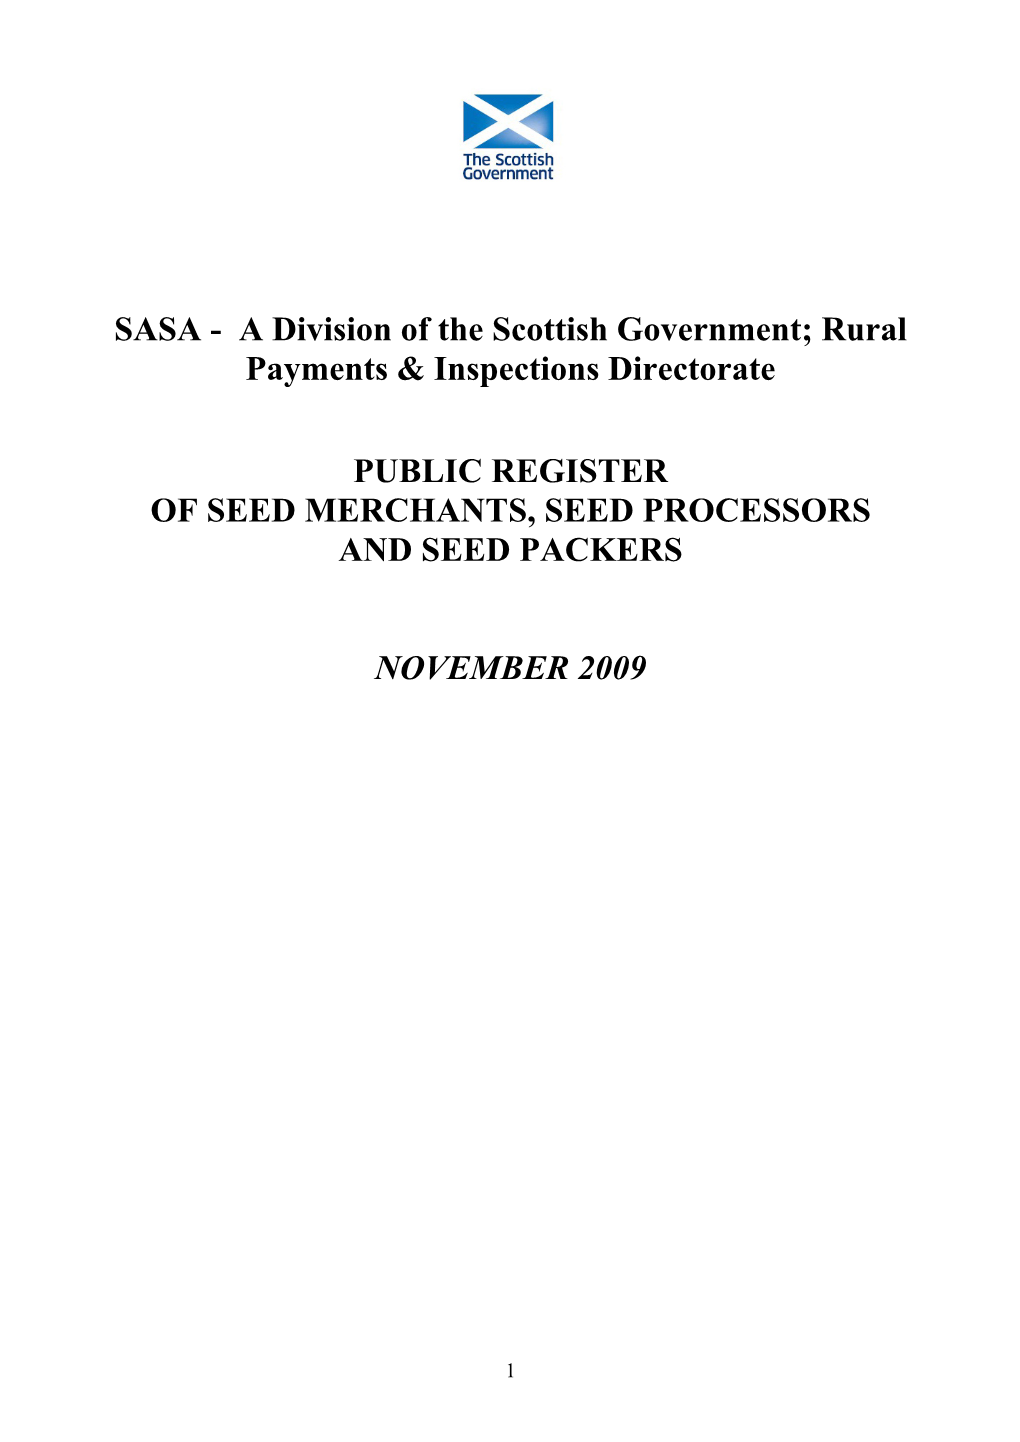 SASA - a Division of the Scottish Government; Rural Payments & Inspections Directorate